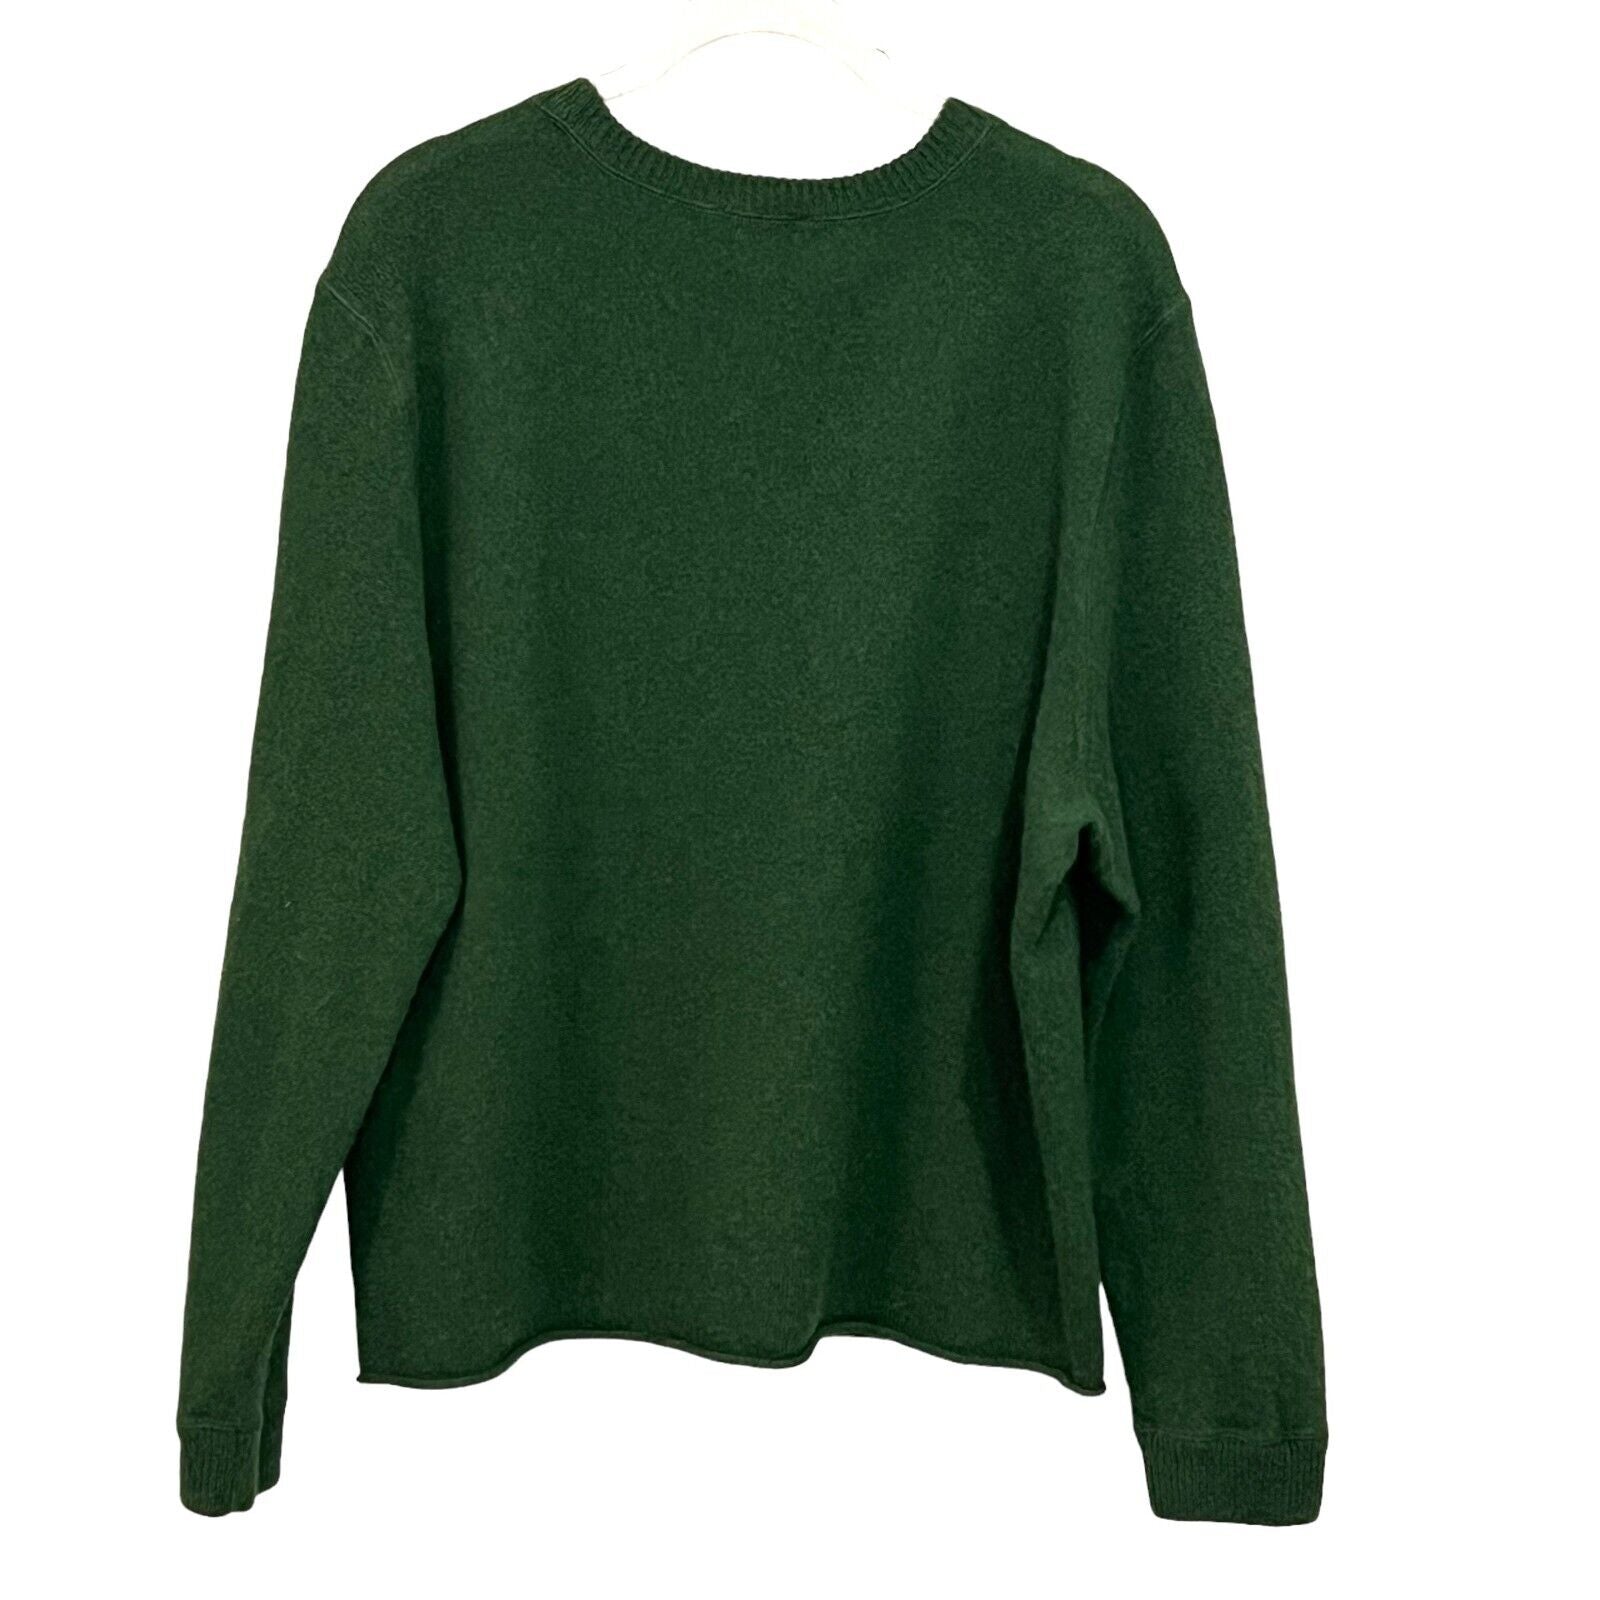 Reformation Green Cashmere Sweater Size Large